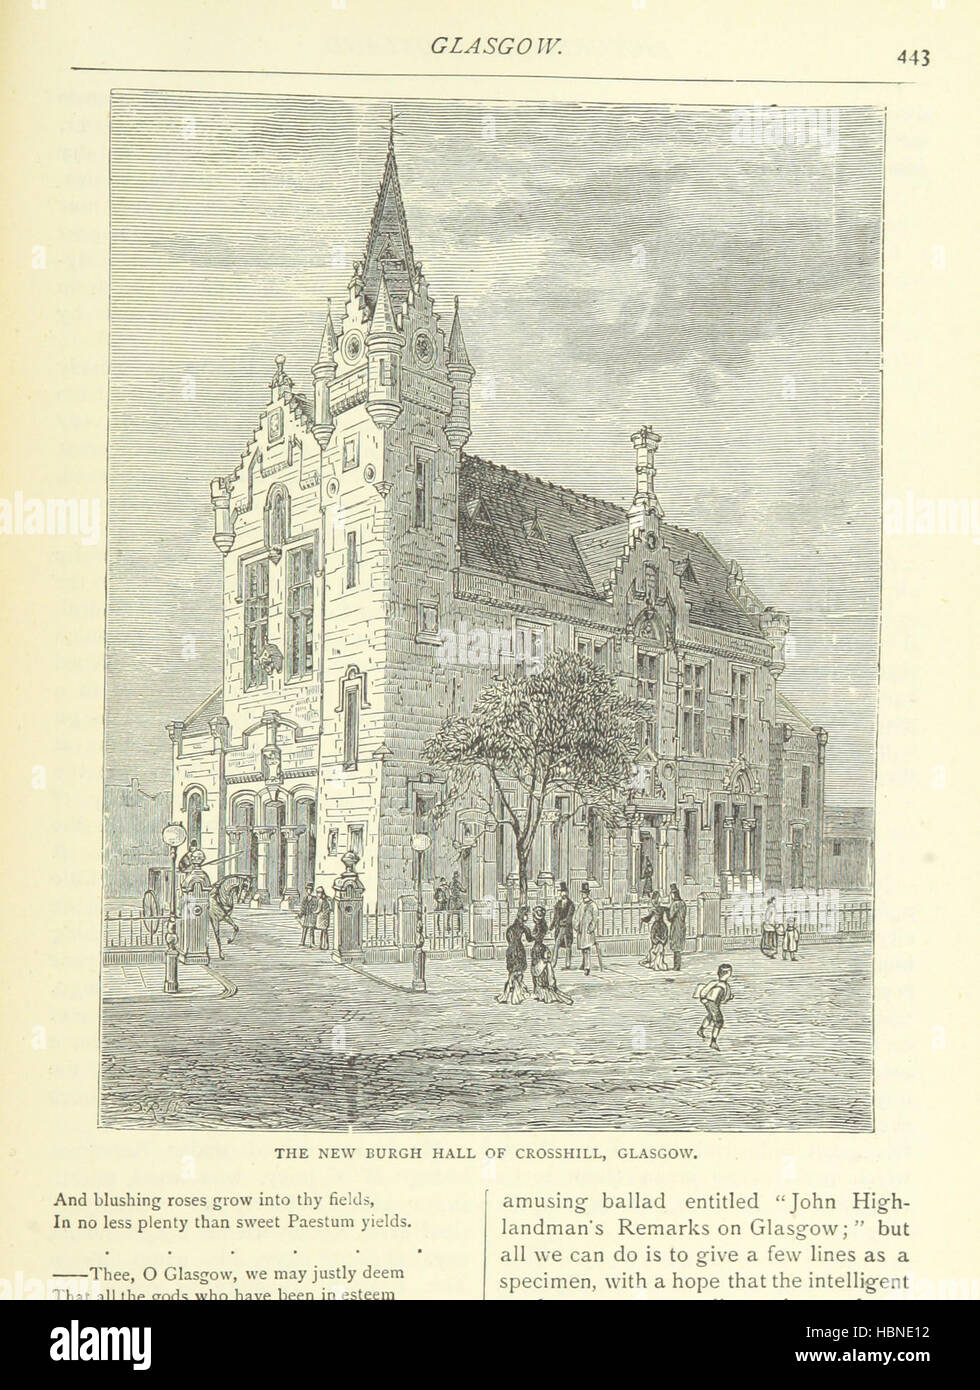 Image taken from page 463 of 'Picturesque Scotland, its romantic scenes and historical associations, described in lay and legend, song and story ... Illustrated, etc' Image taken from page 463 of 'Picturesque Scotland, its romantic Stock Photo